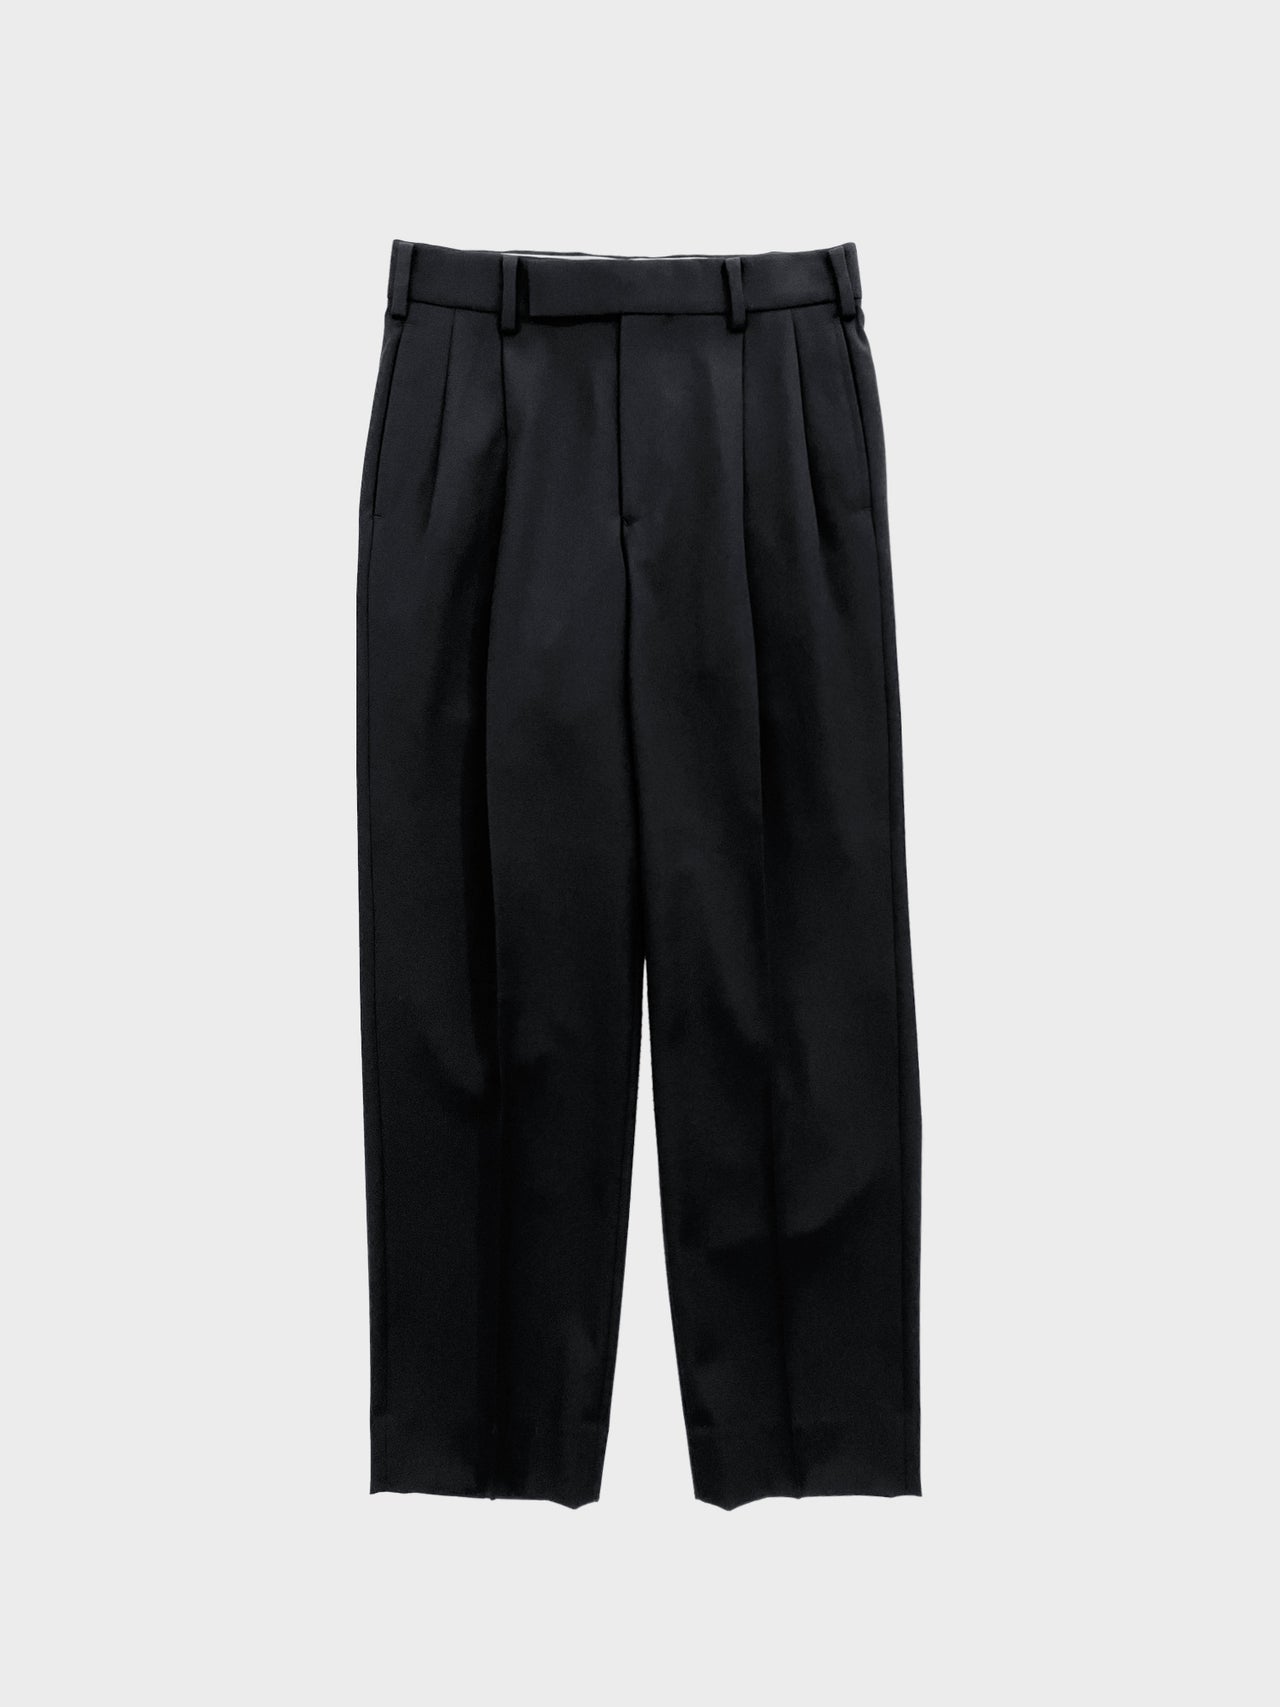 【20%OFF】WEWILL / 2 TUCK DRESS TROUSERS (BLACK)